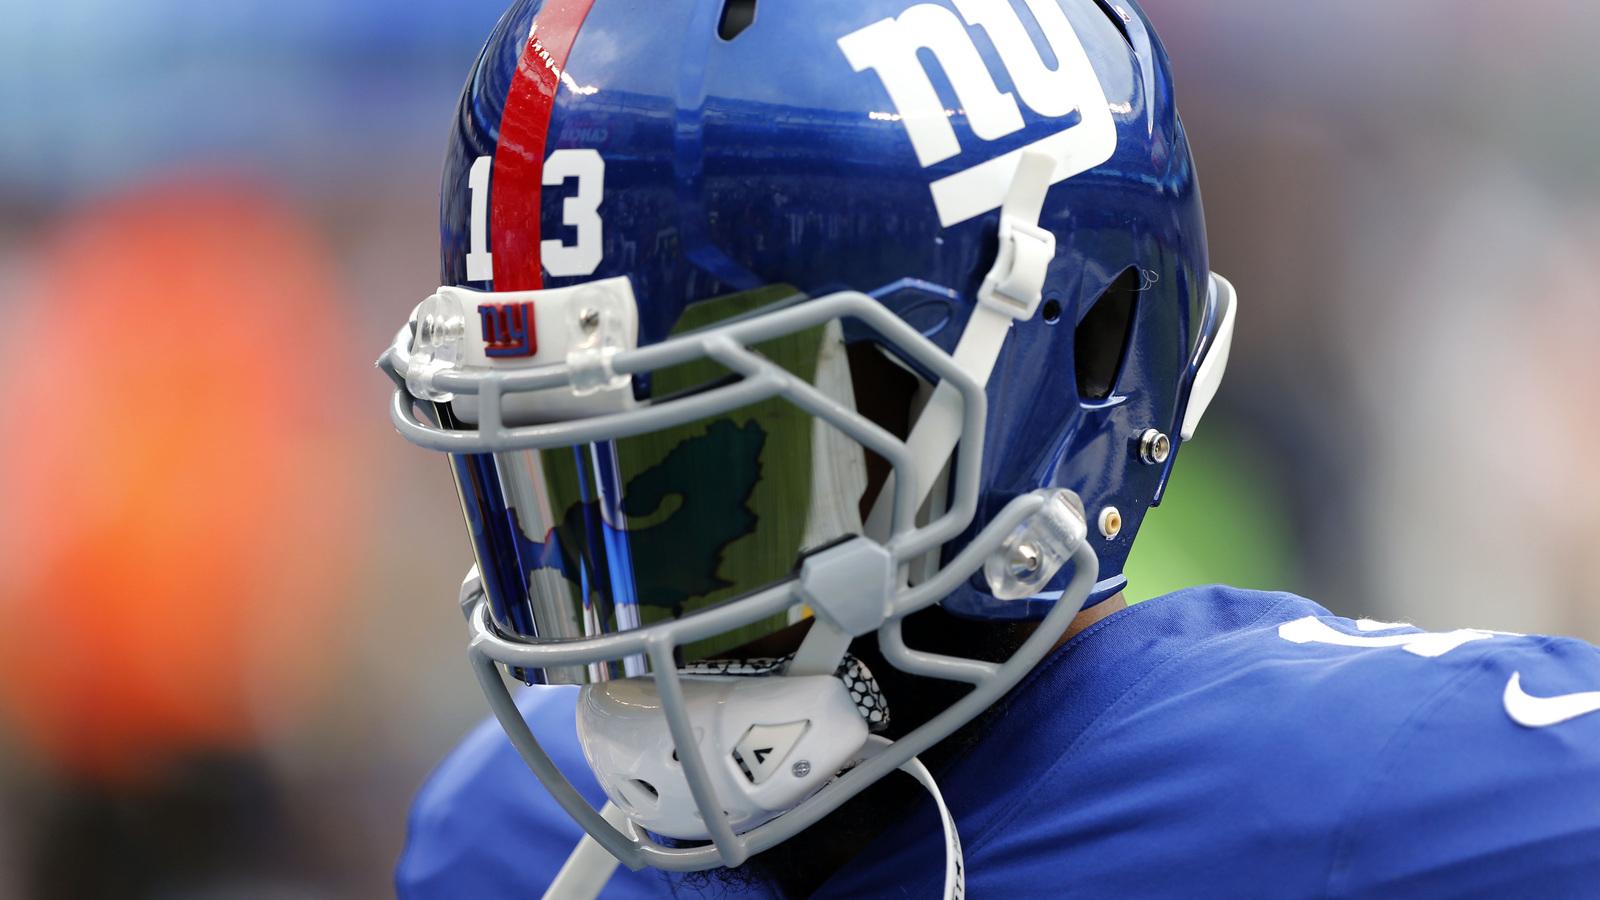 Giants notes: Who are the logical suitors for OBJ?